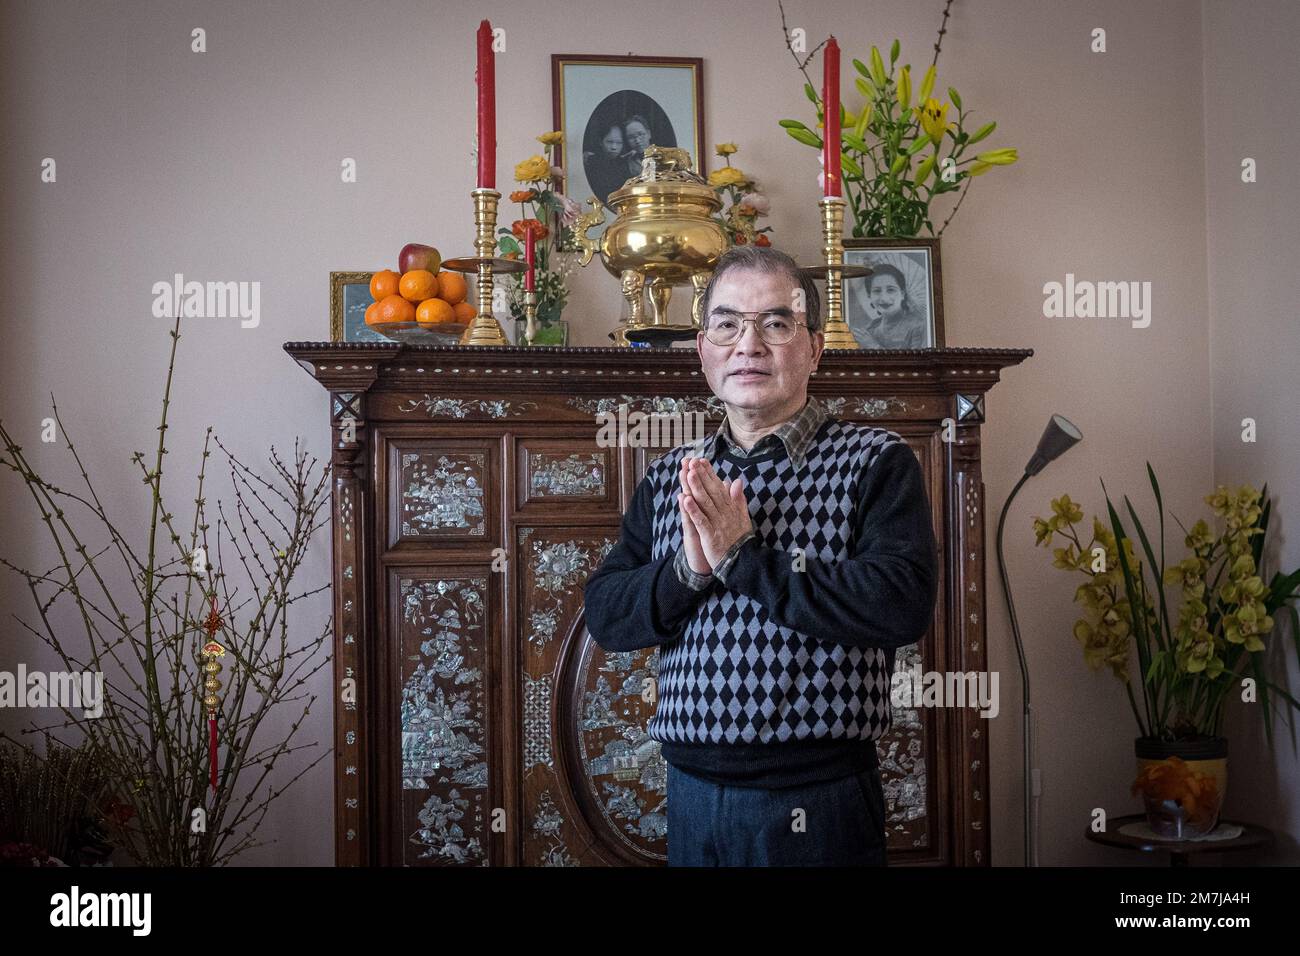 Olivier Donnars / Le Pictorium -  Tet, Vietnamese New Year -  7/2/2016  -  France / Ile-de-France (region)  -  On the occasion of Tet, the Vietnamese Stock Photo